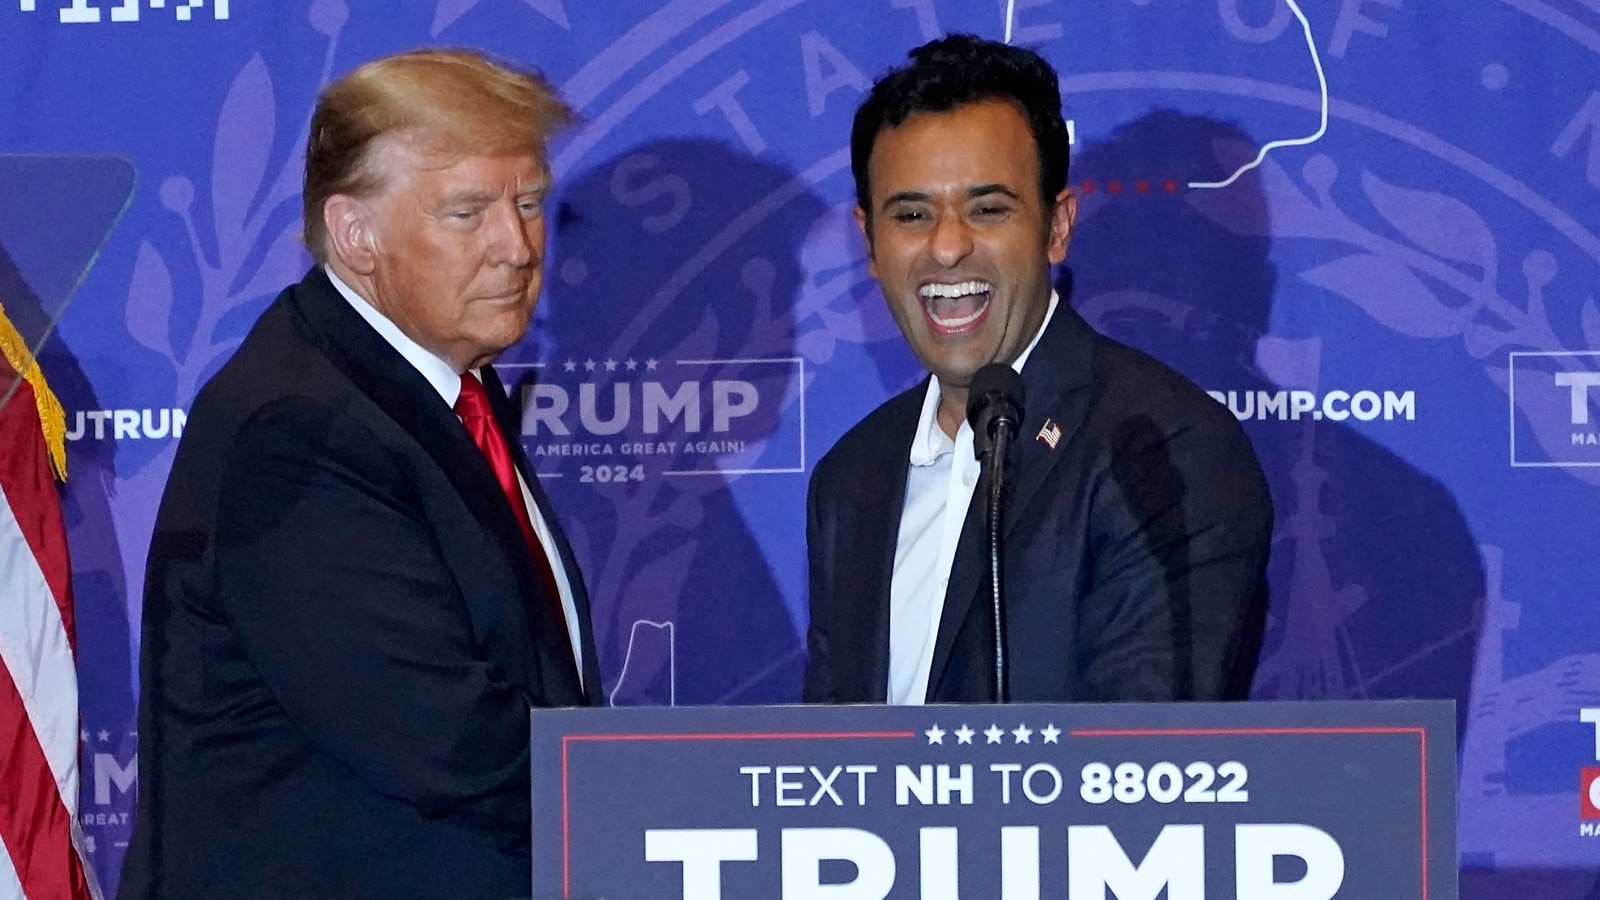 Vivek Ramaswamy to spend a day at Donald Trump's side in hush-money trial